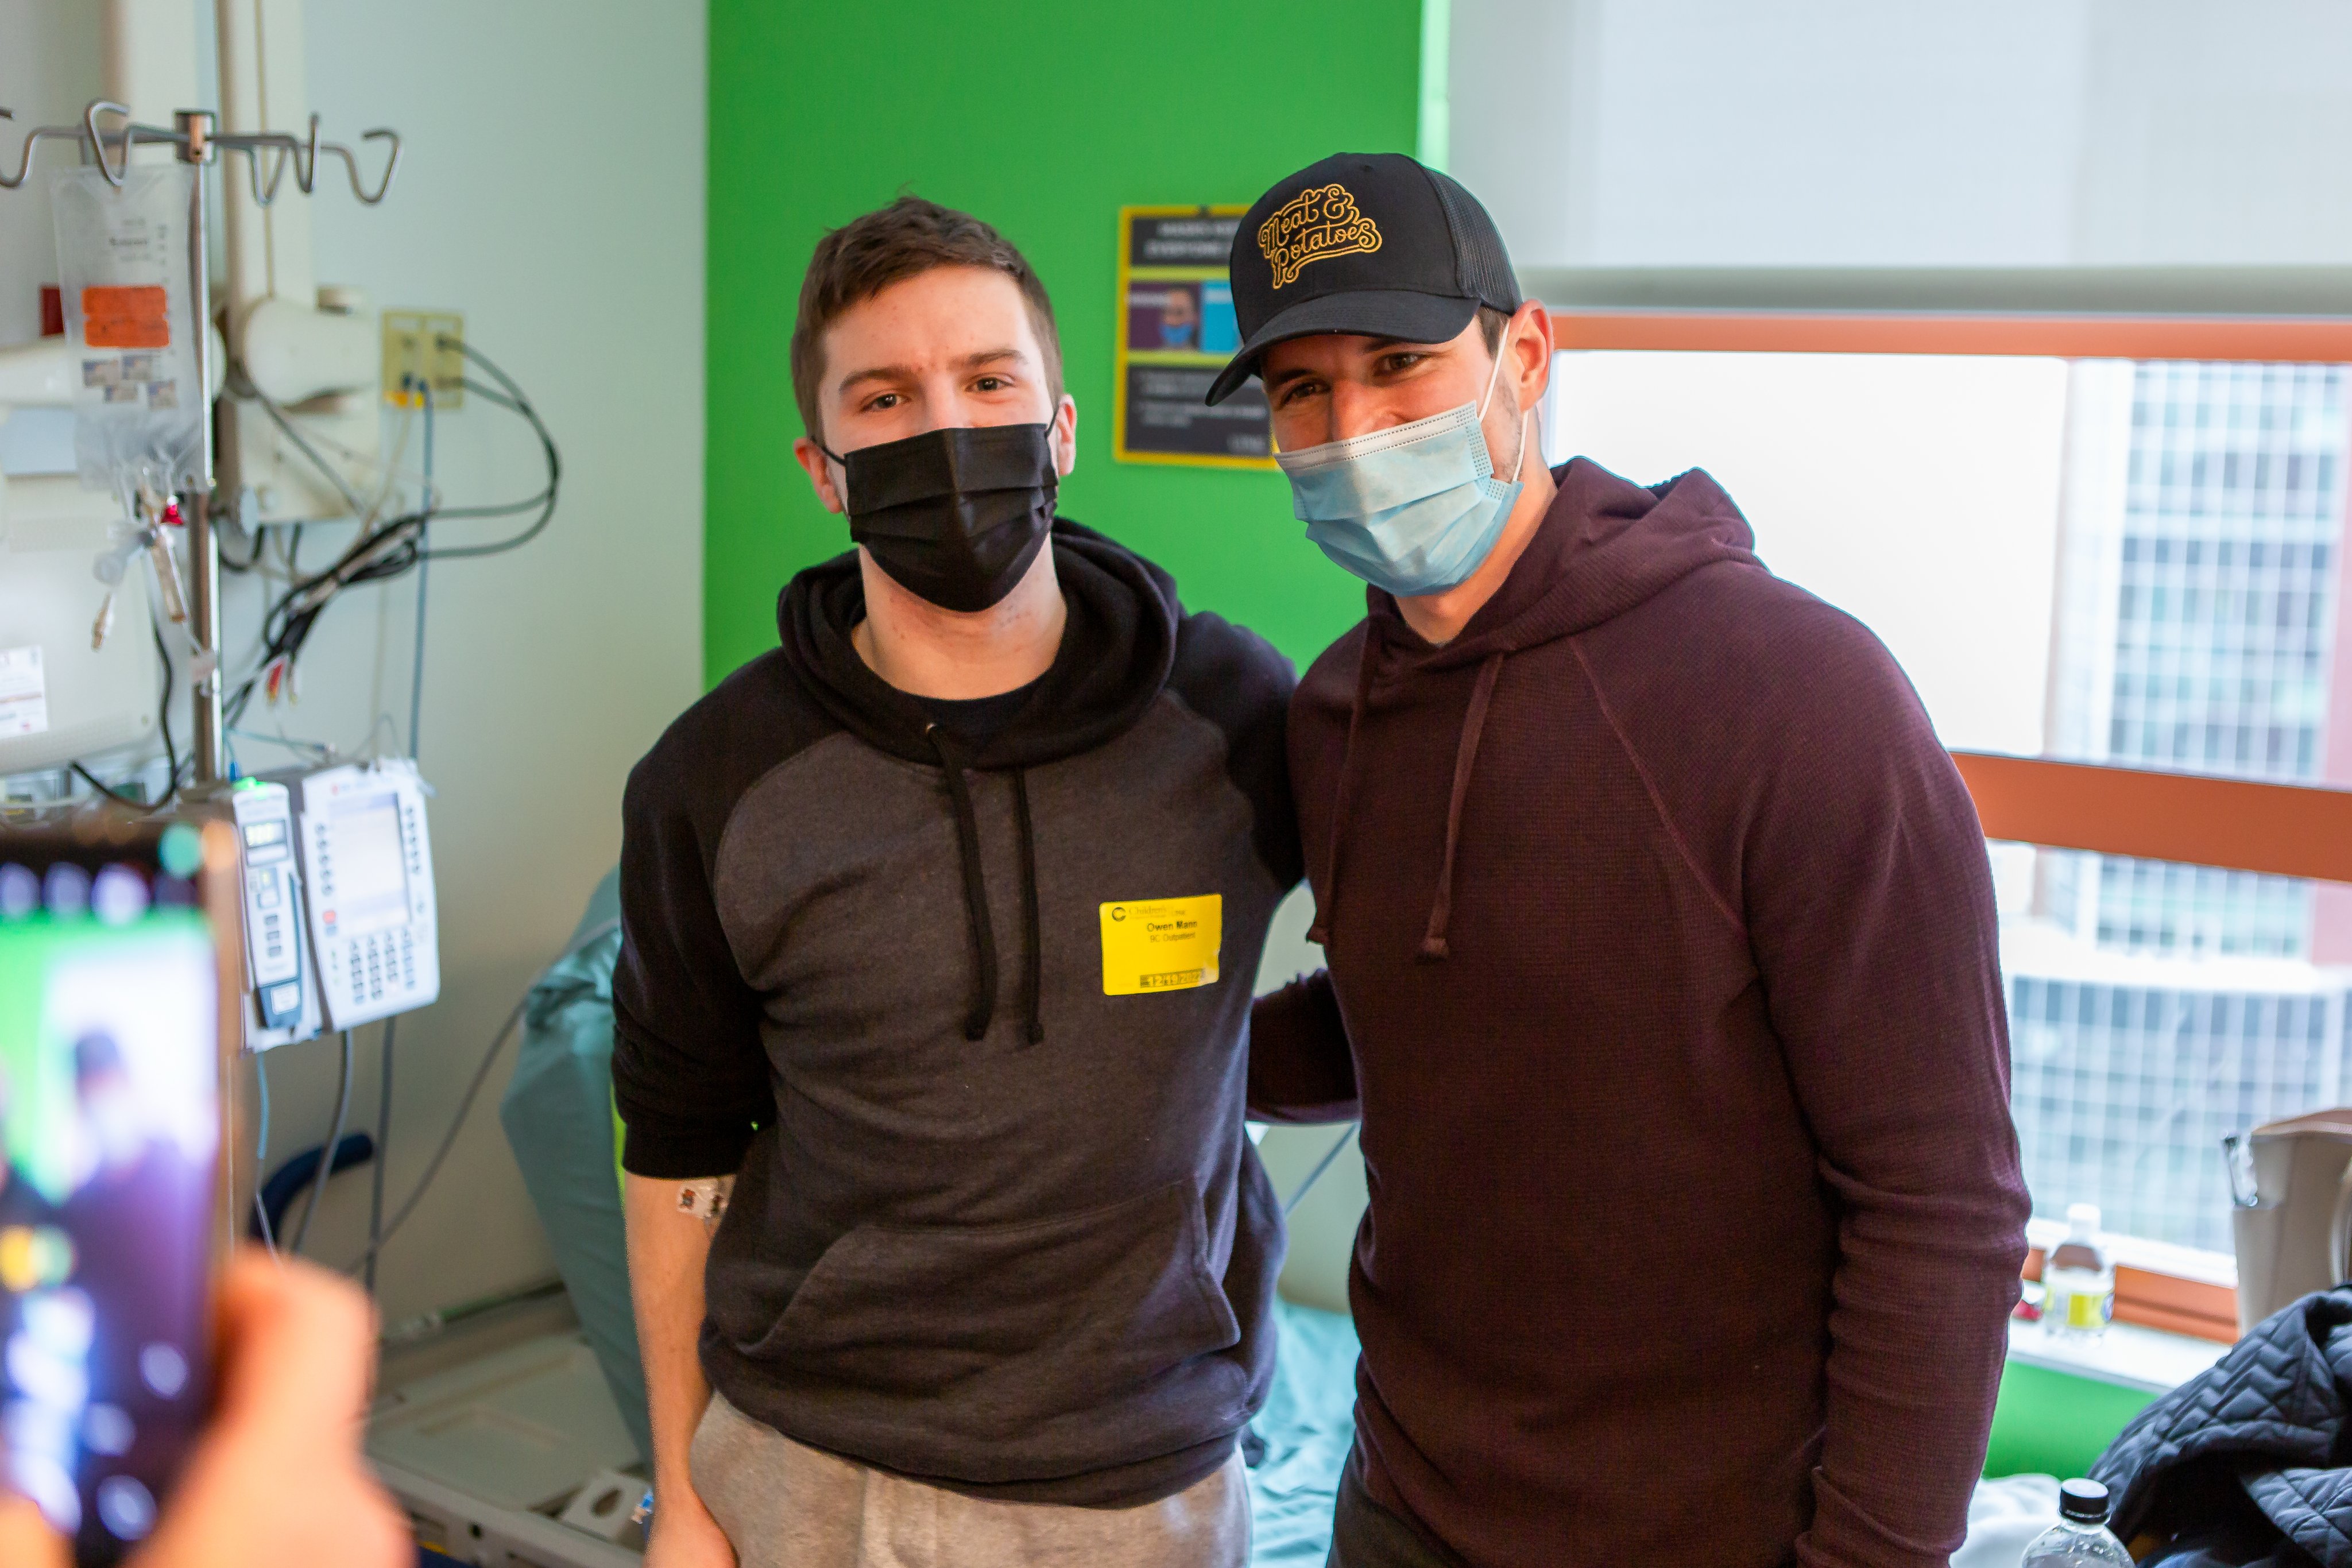 Sidney Crosby Visits the Children's Hospital of Pittsburgh 